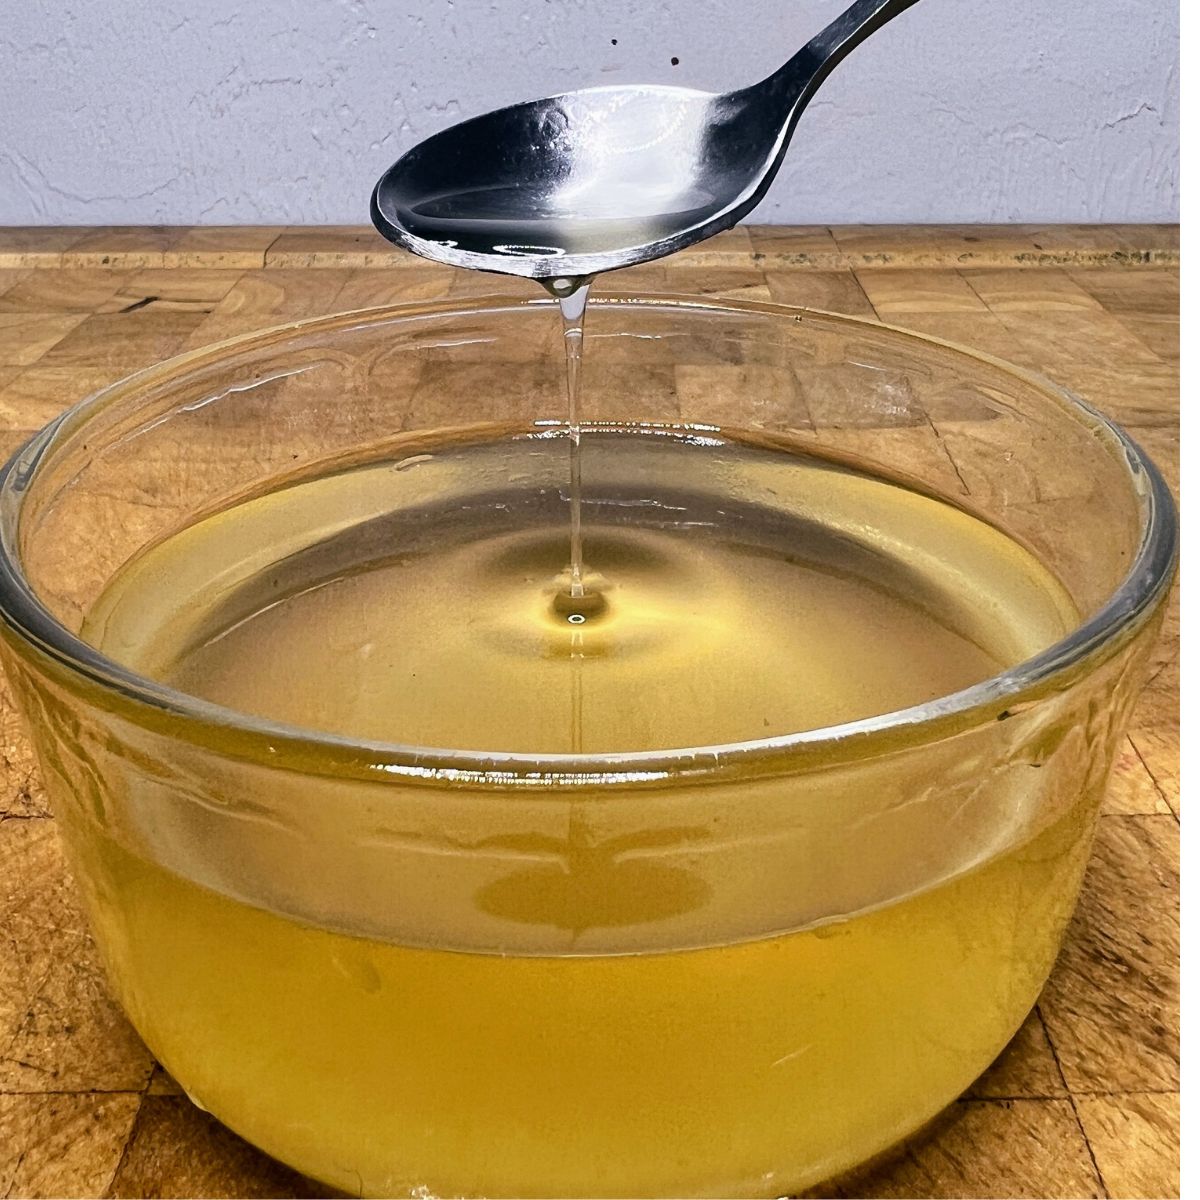 Ginger simple syrup in a bowl being scooped by a bowl.